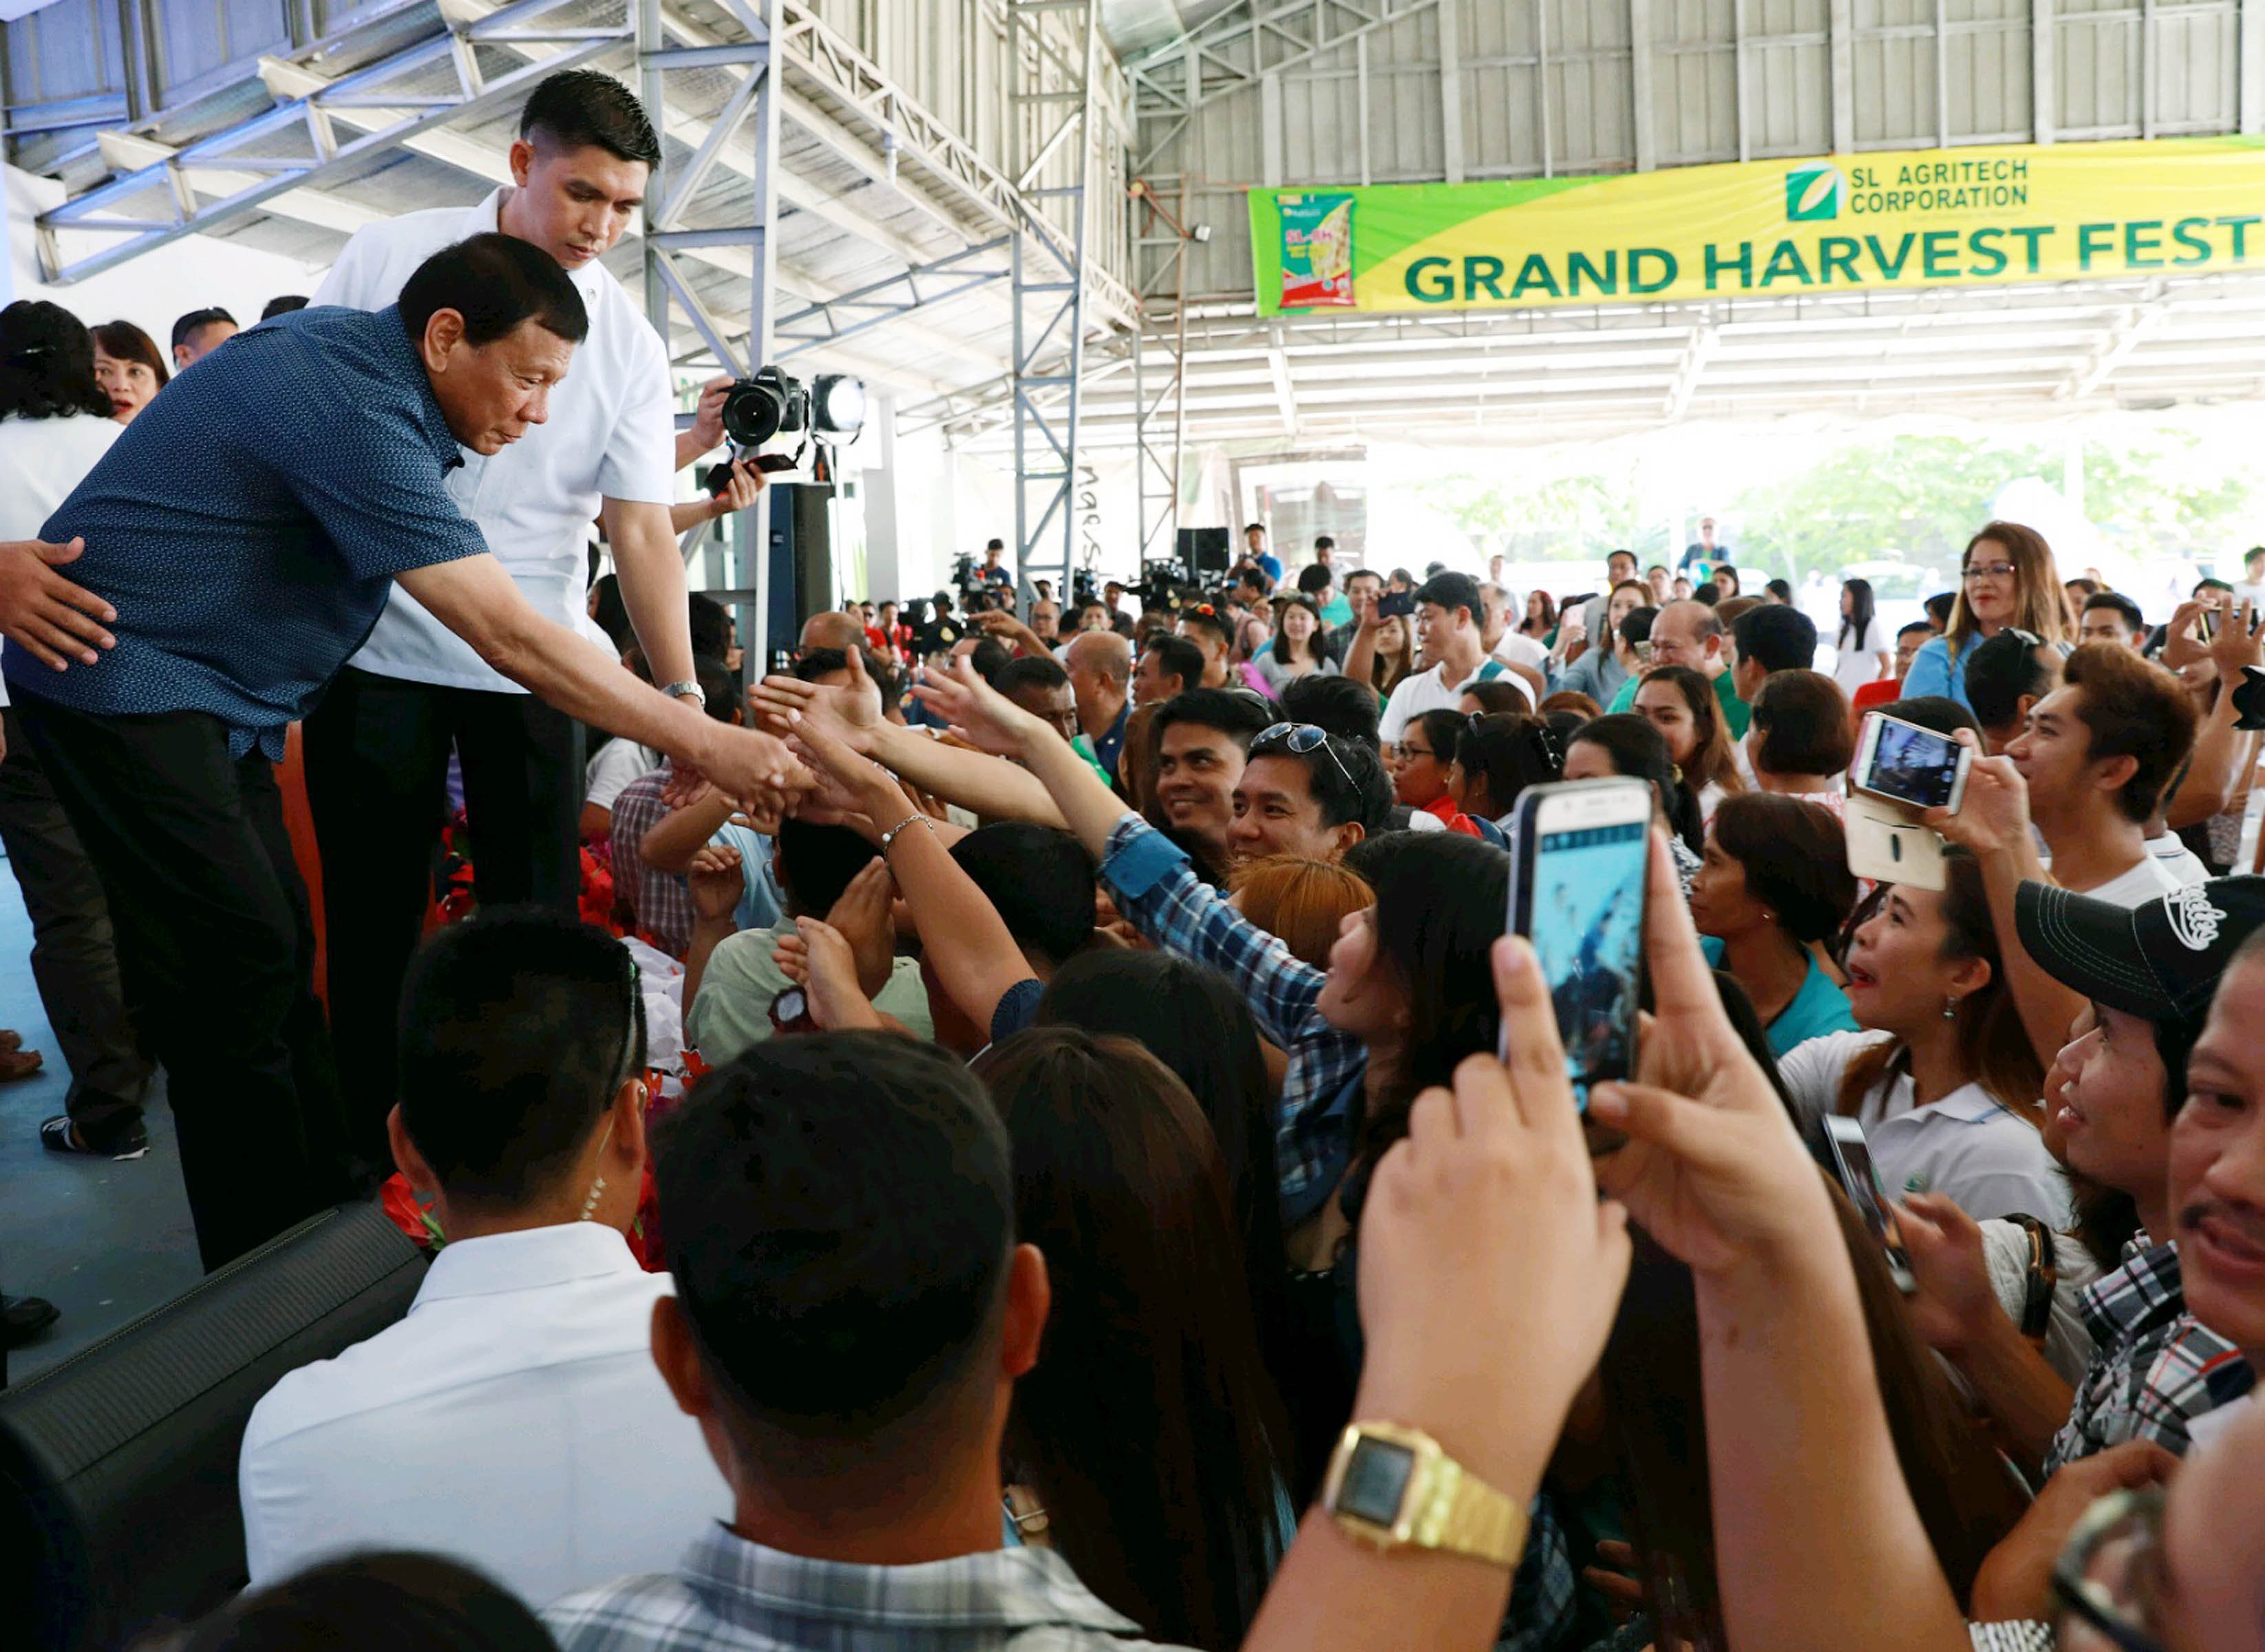 PRRD at the Grand Harvest Festival of SL Agritech Corporation